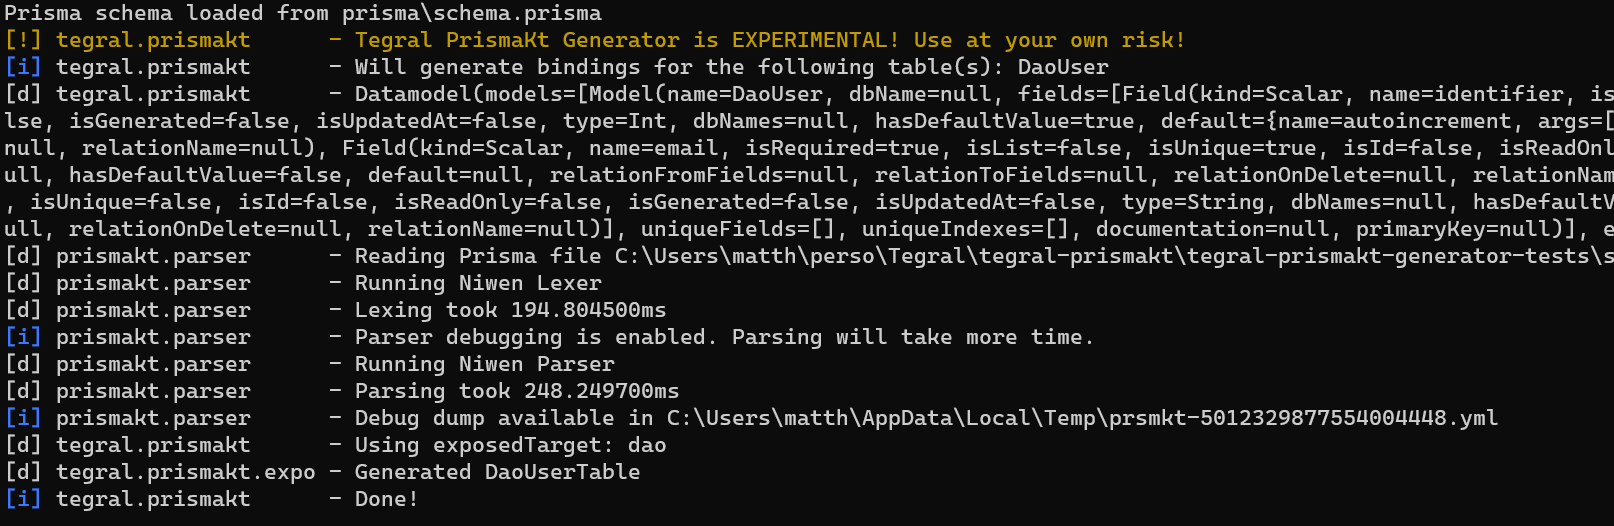 Screenshot of the console output of PrismaKT